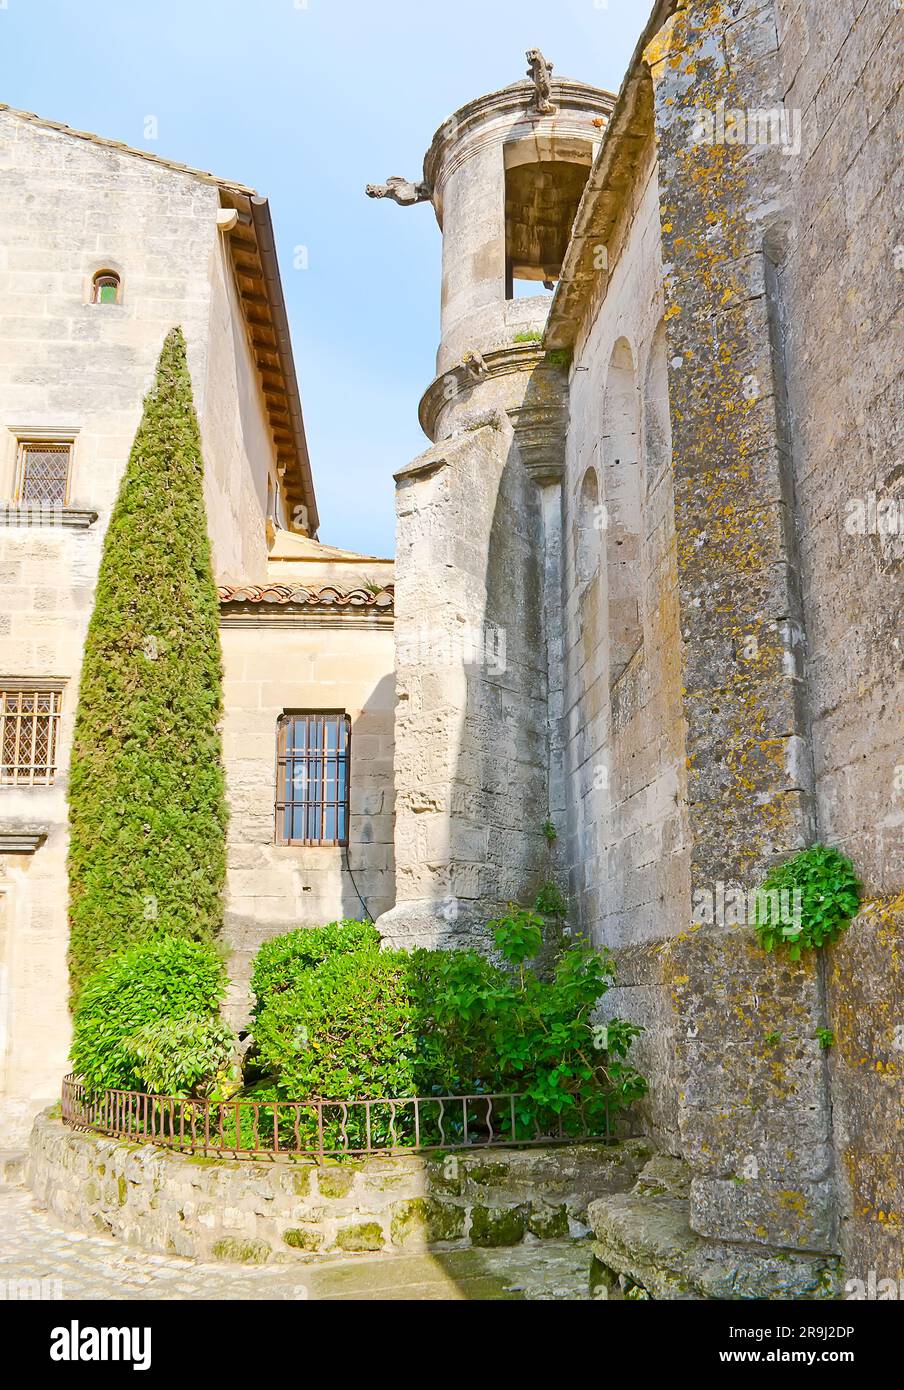 The medieval stone town of Les Baux-de-Provence with a corner and a tower of St Vincent Church and tiny flower bed with green plants and thuja tree, F Stock Photo